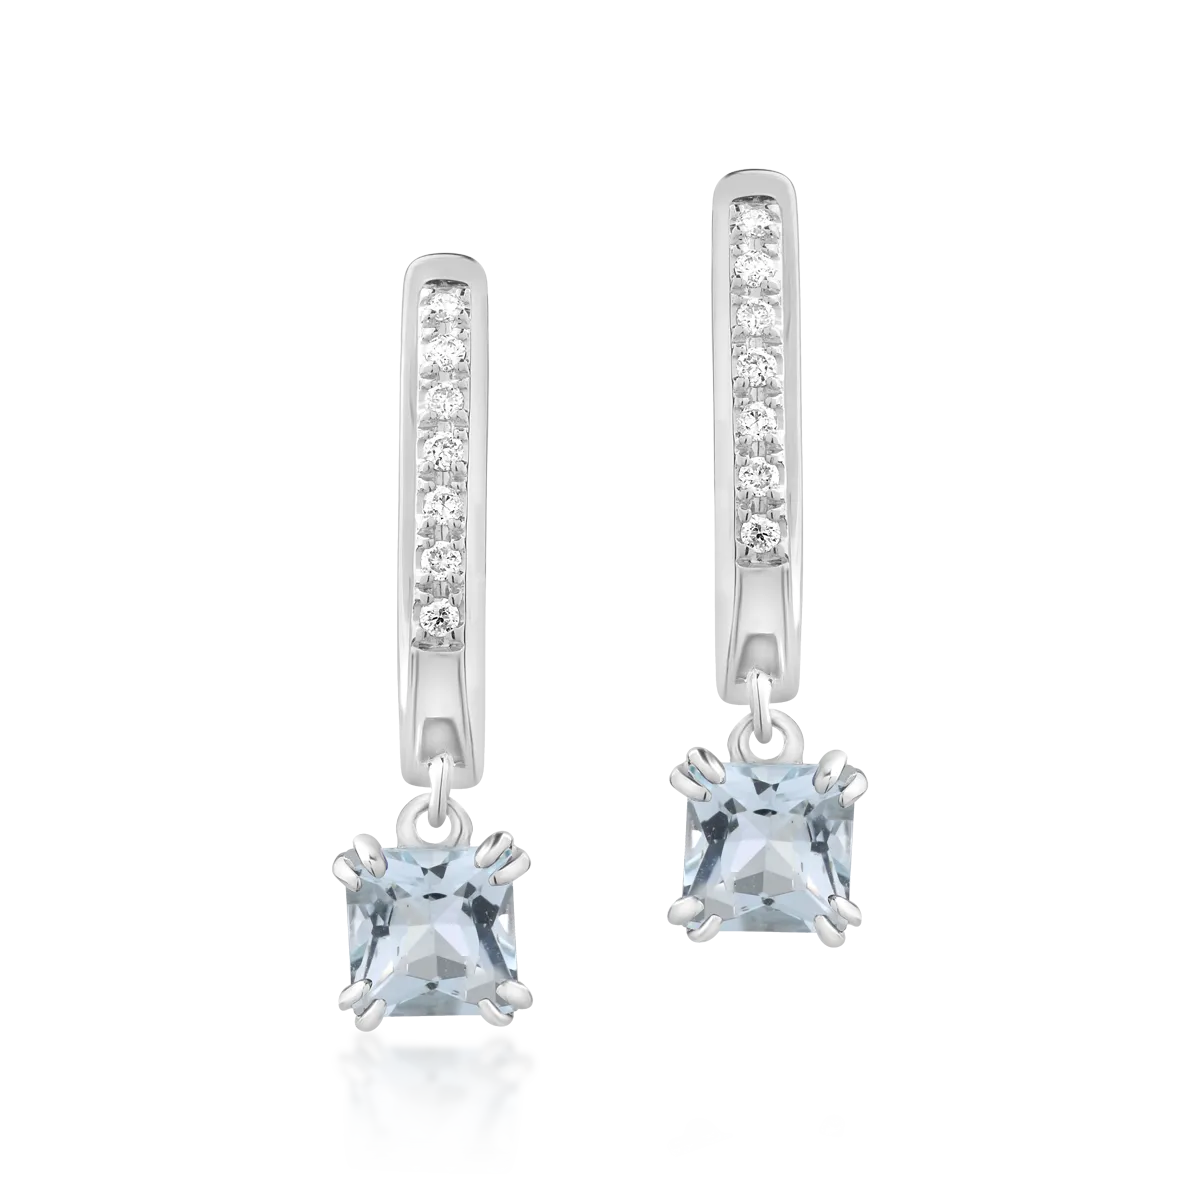 18K white gold earrings with aquamarine of 0.61ct and diamonds of 0.05ct